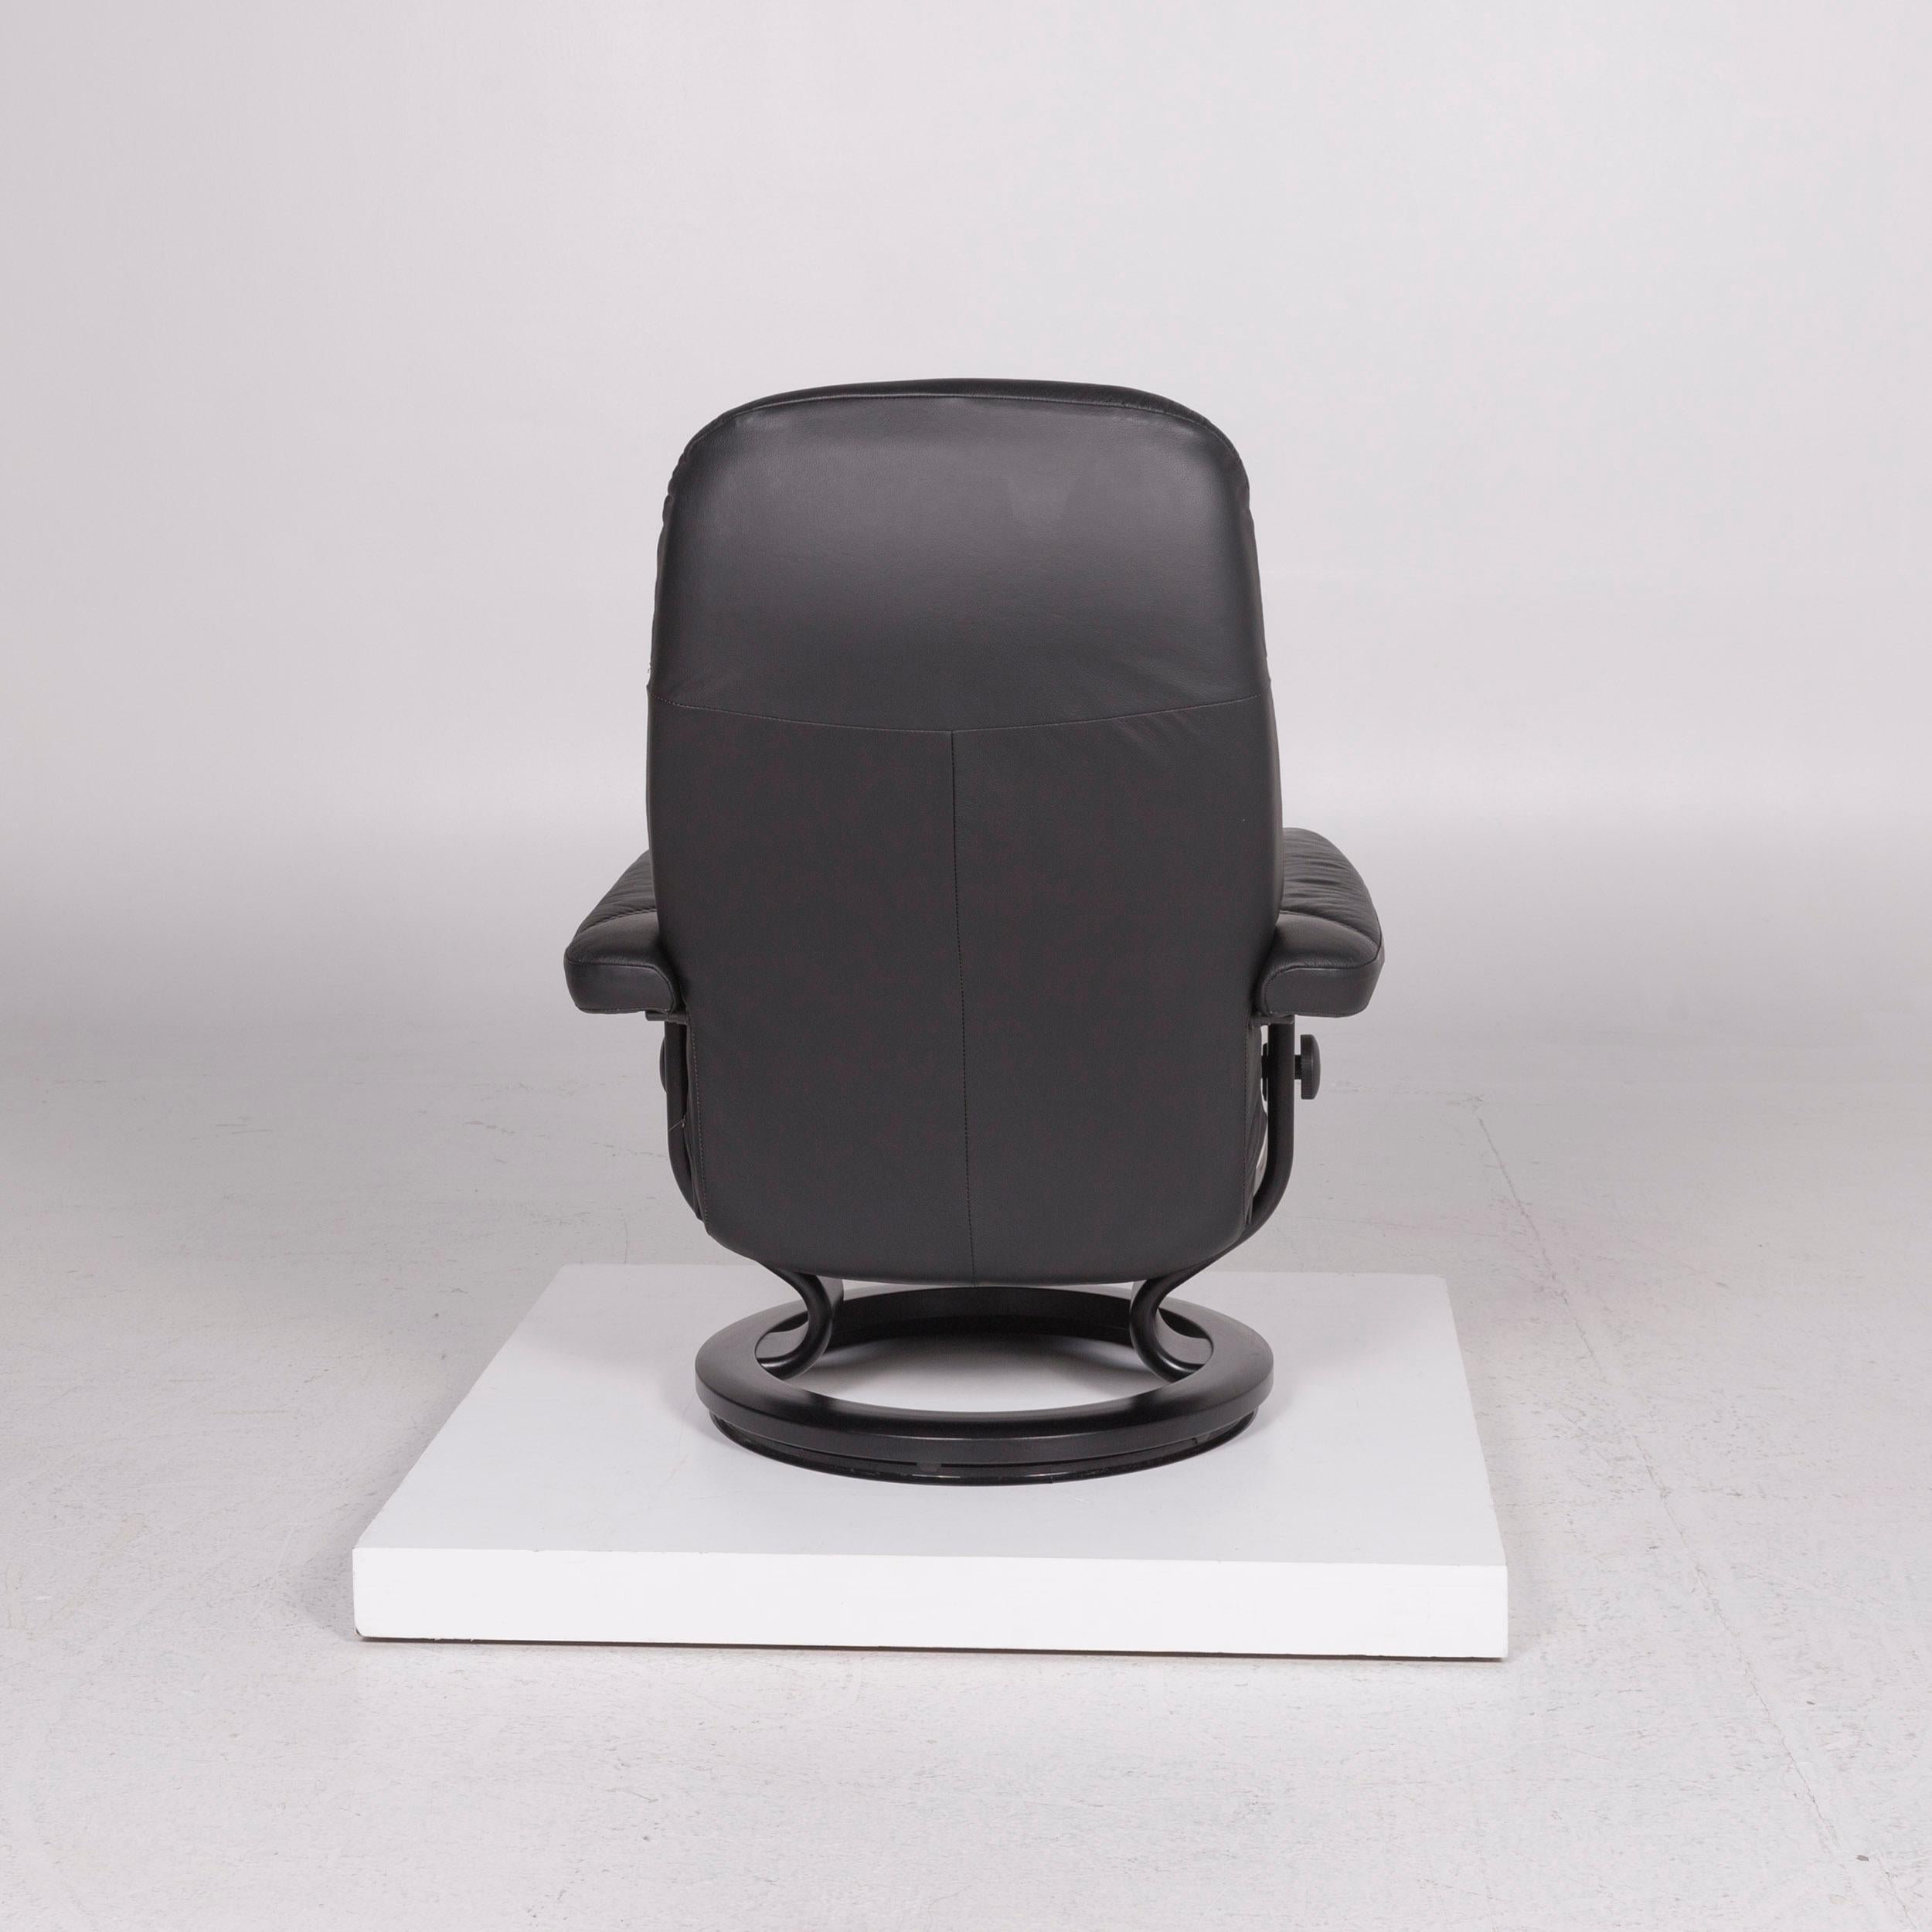 Stressless Consul Leather Armchair Black Incl. Stool Size M Relax Function 4